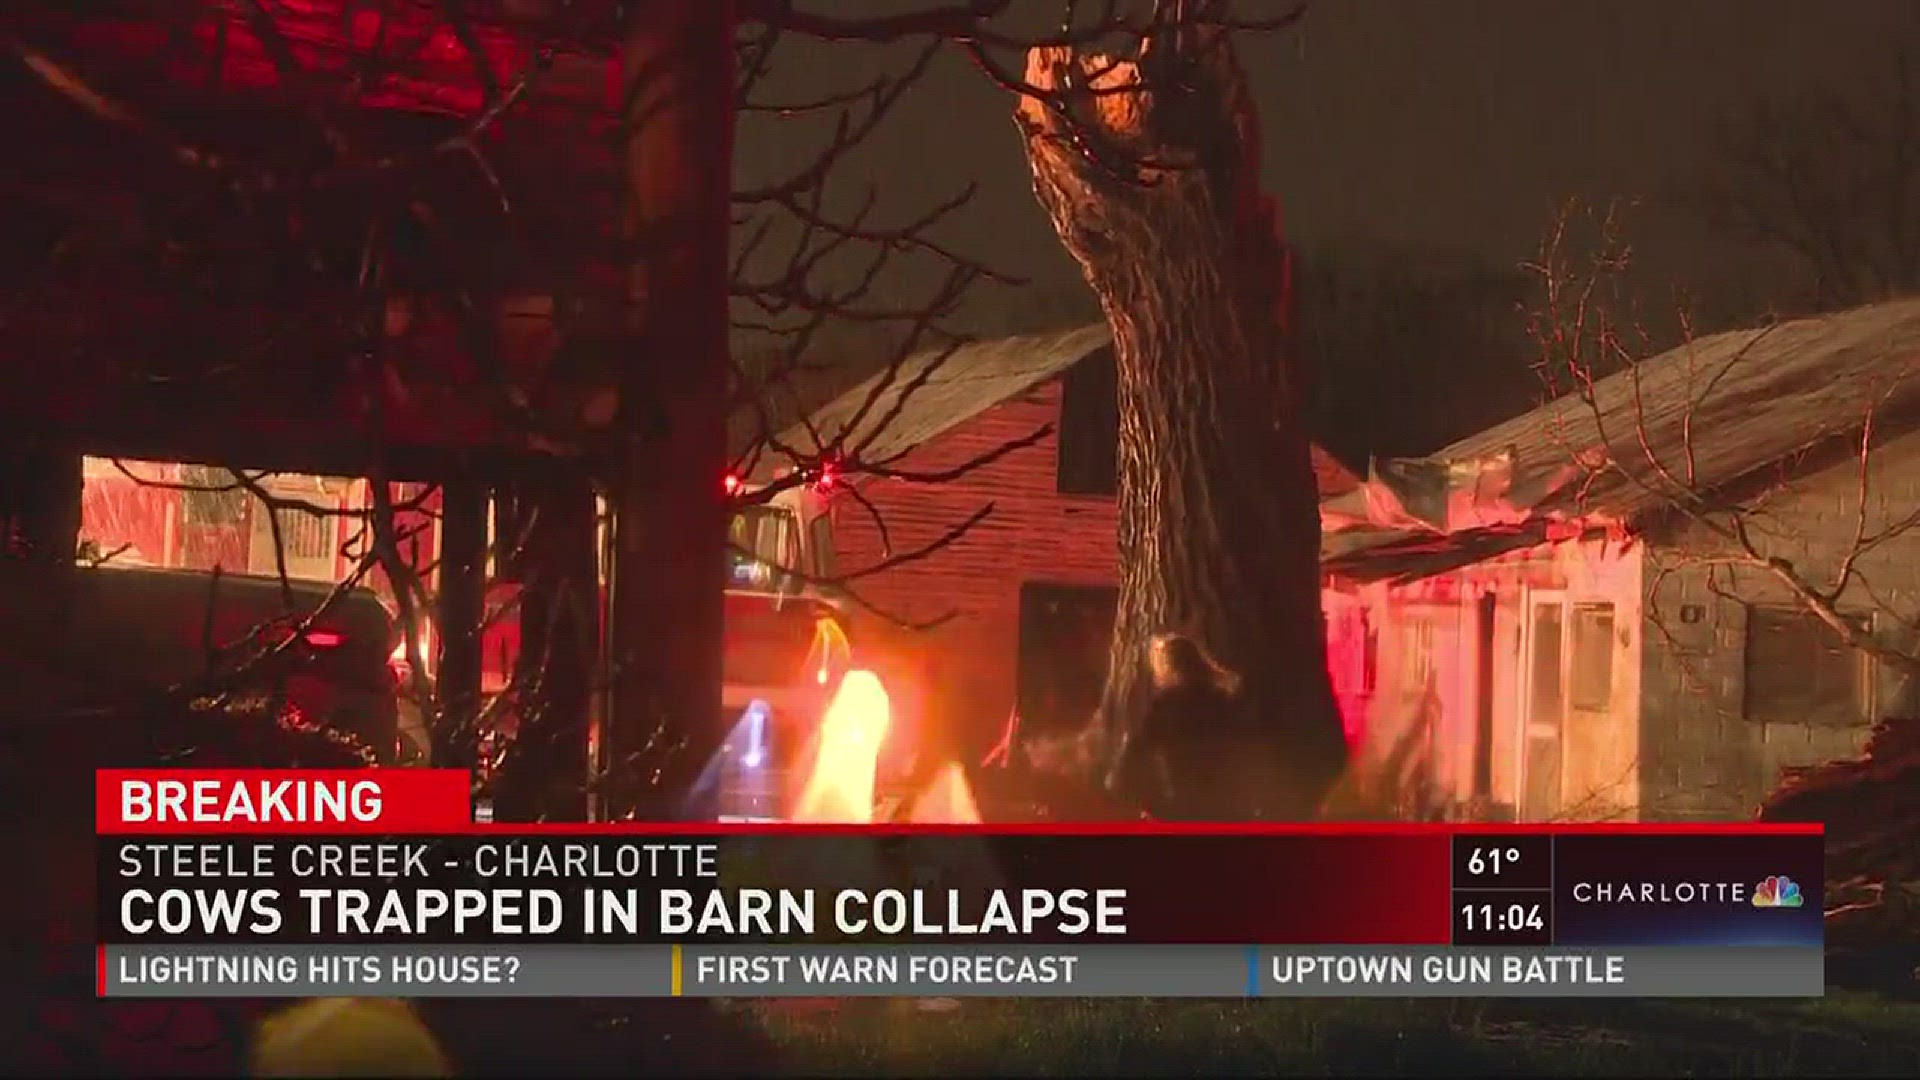 Two cows were trapped when the barn collapsed, one died from its injuries.